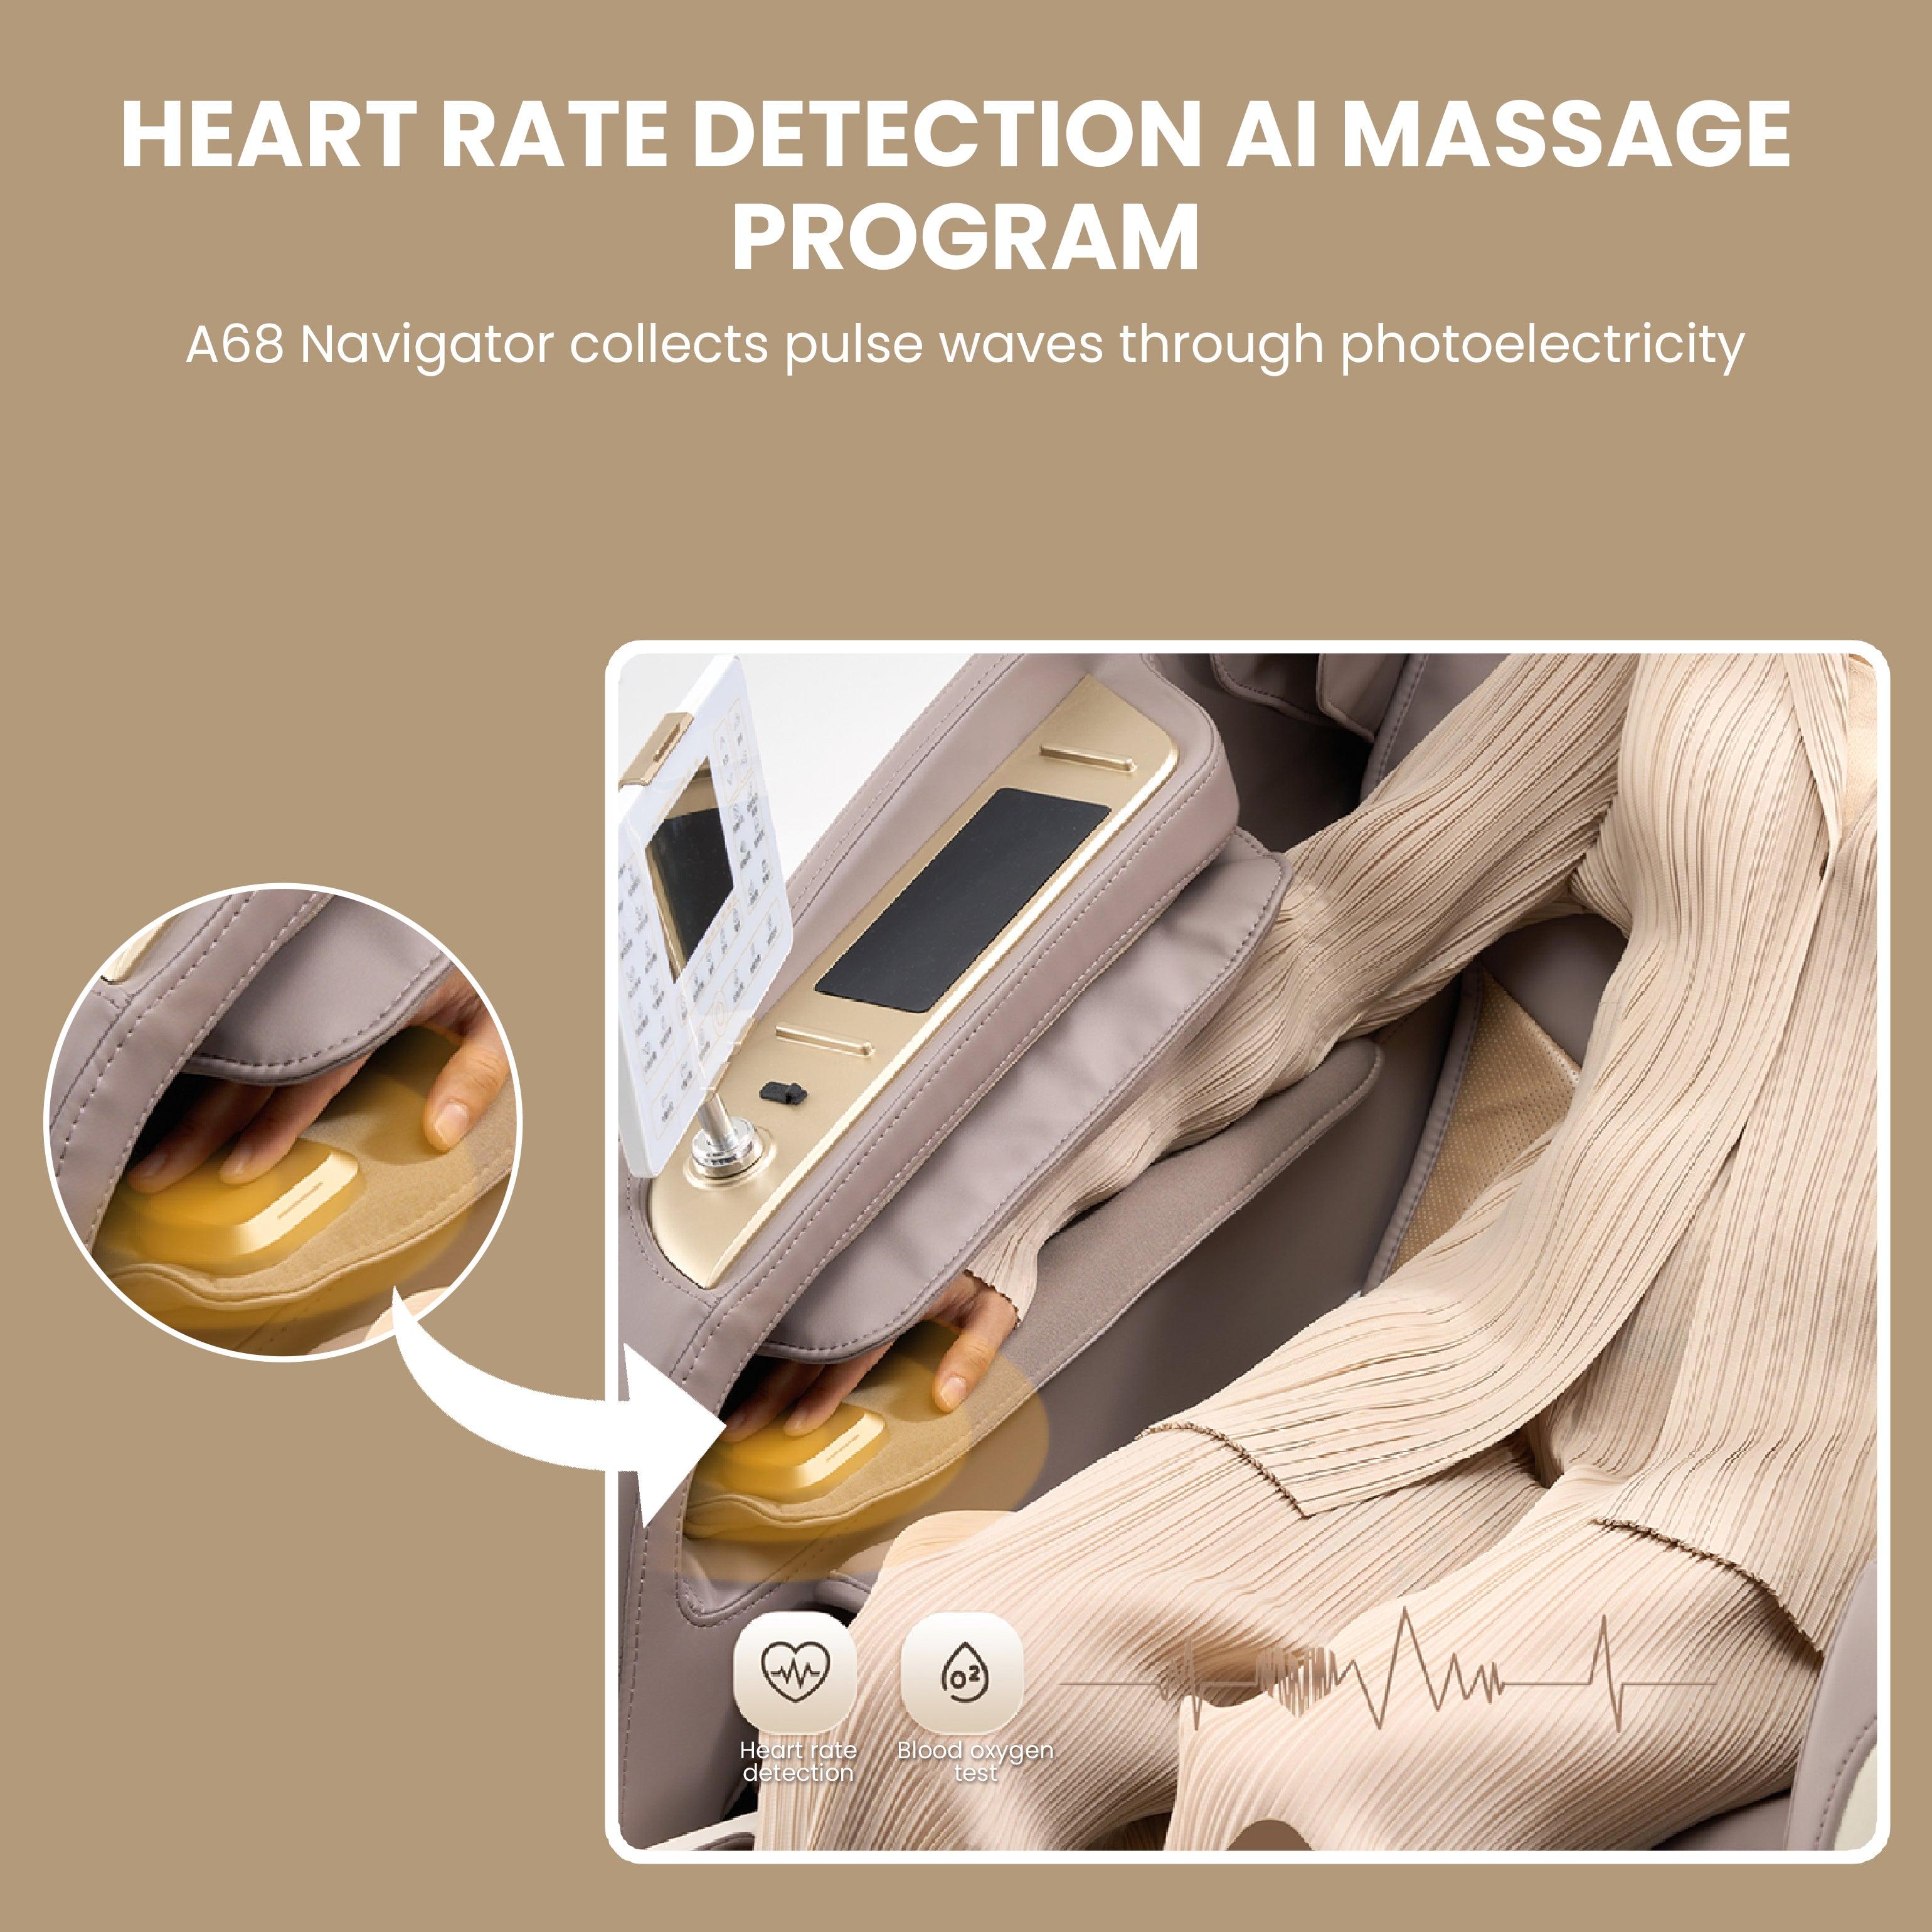 Royal Majestic Pro Massage Chair with heart rate detection and AI smart massage program, showcasing pulse wave collection through photoelectricity.